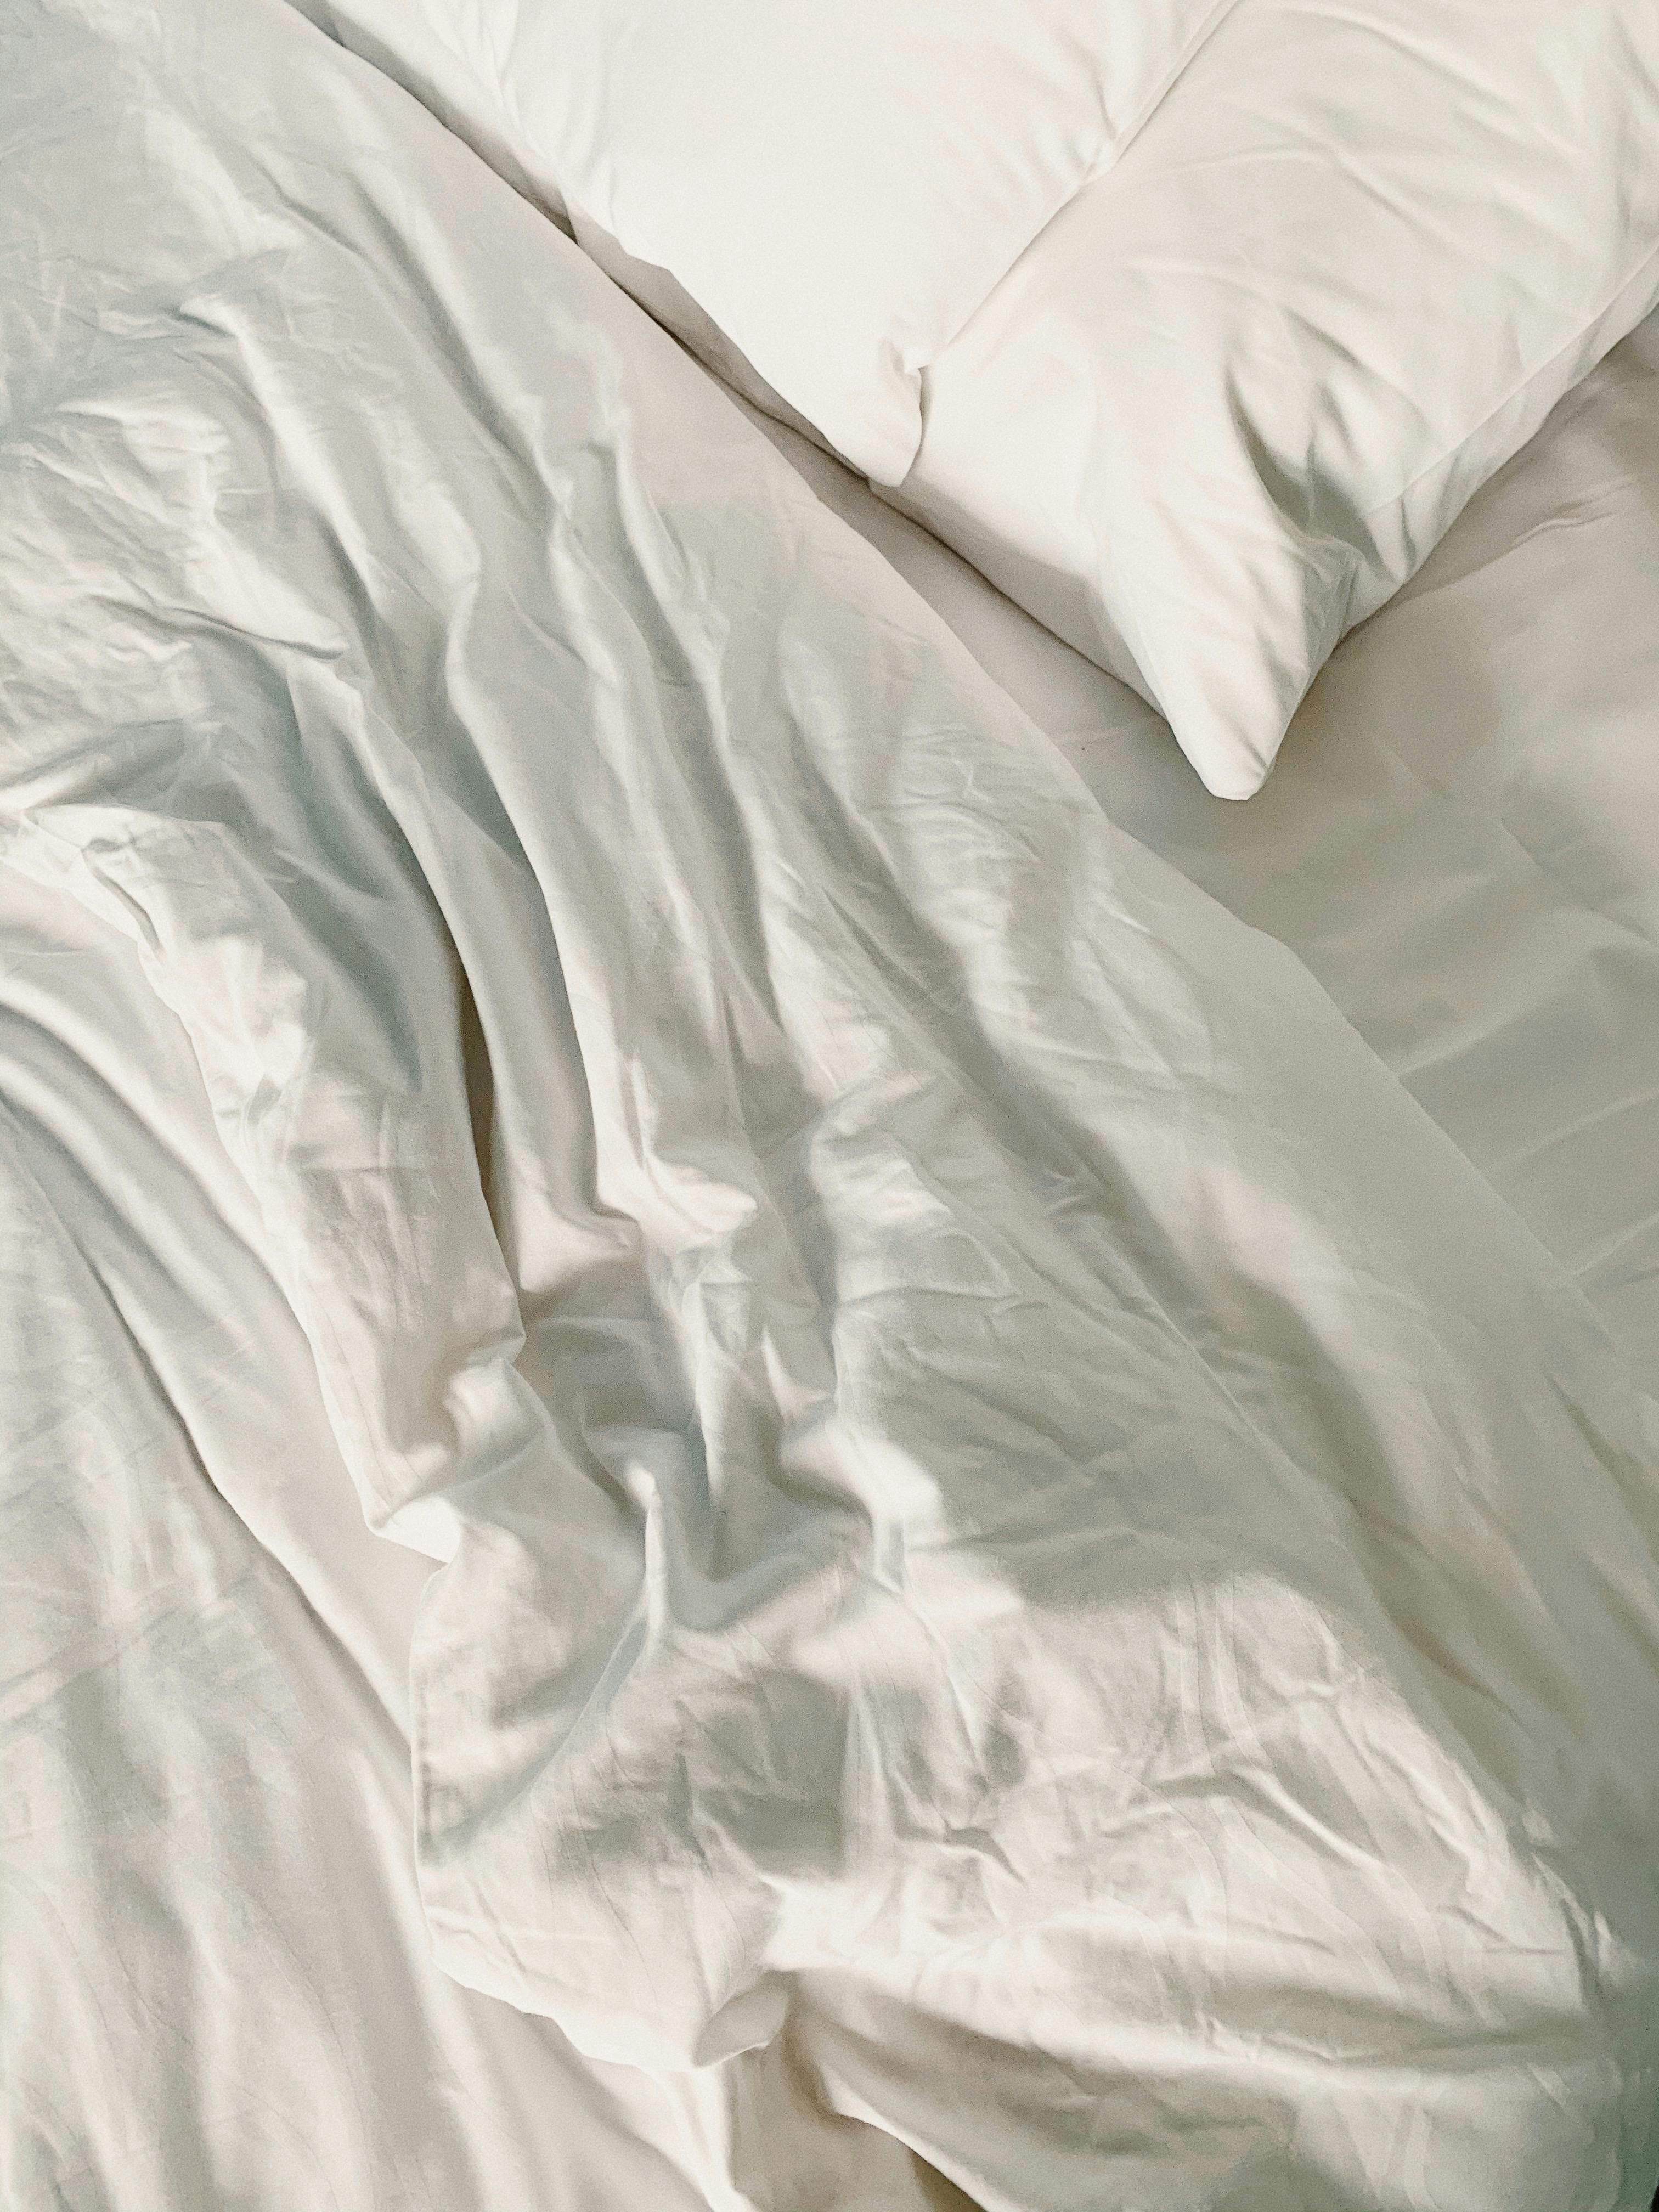 White Pillow and Bed Sheet · Free Stock Photo